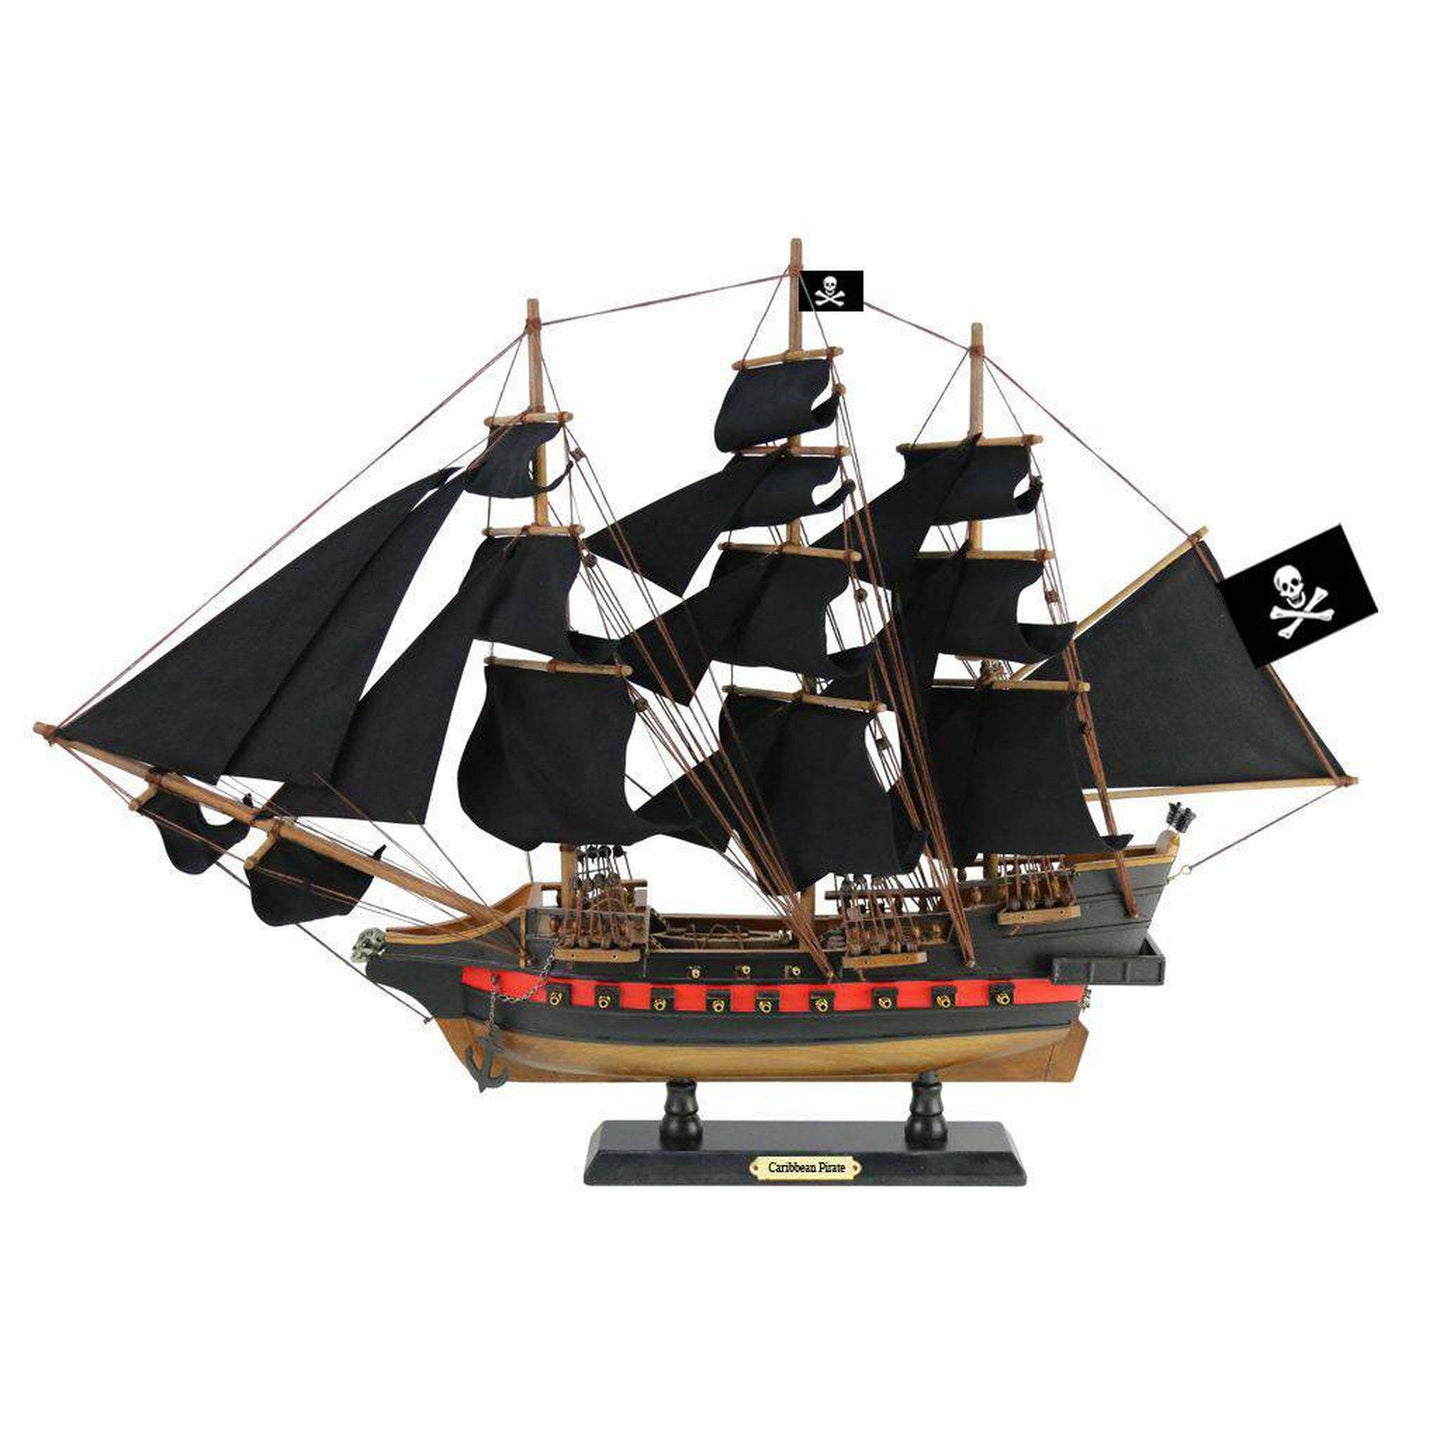 Handcrafted Model Ships Wooden Caribbean Pirate Black Sails Limited Model Pirate Ship 26